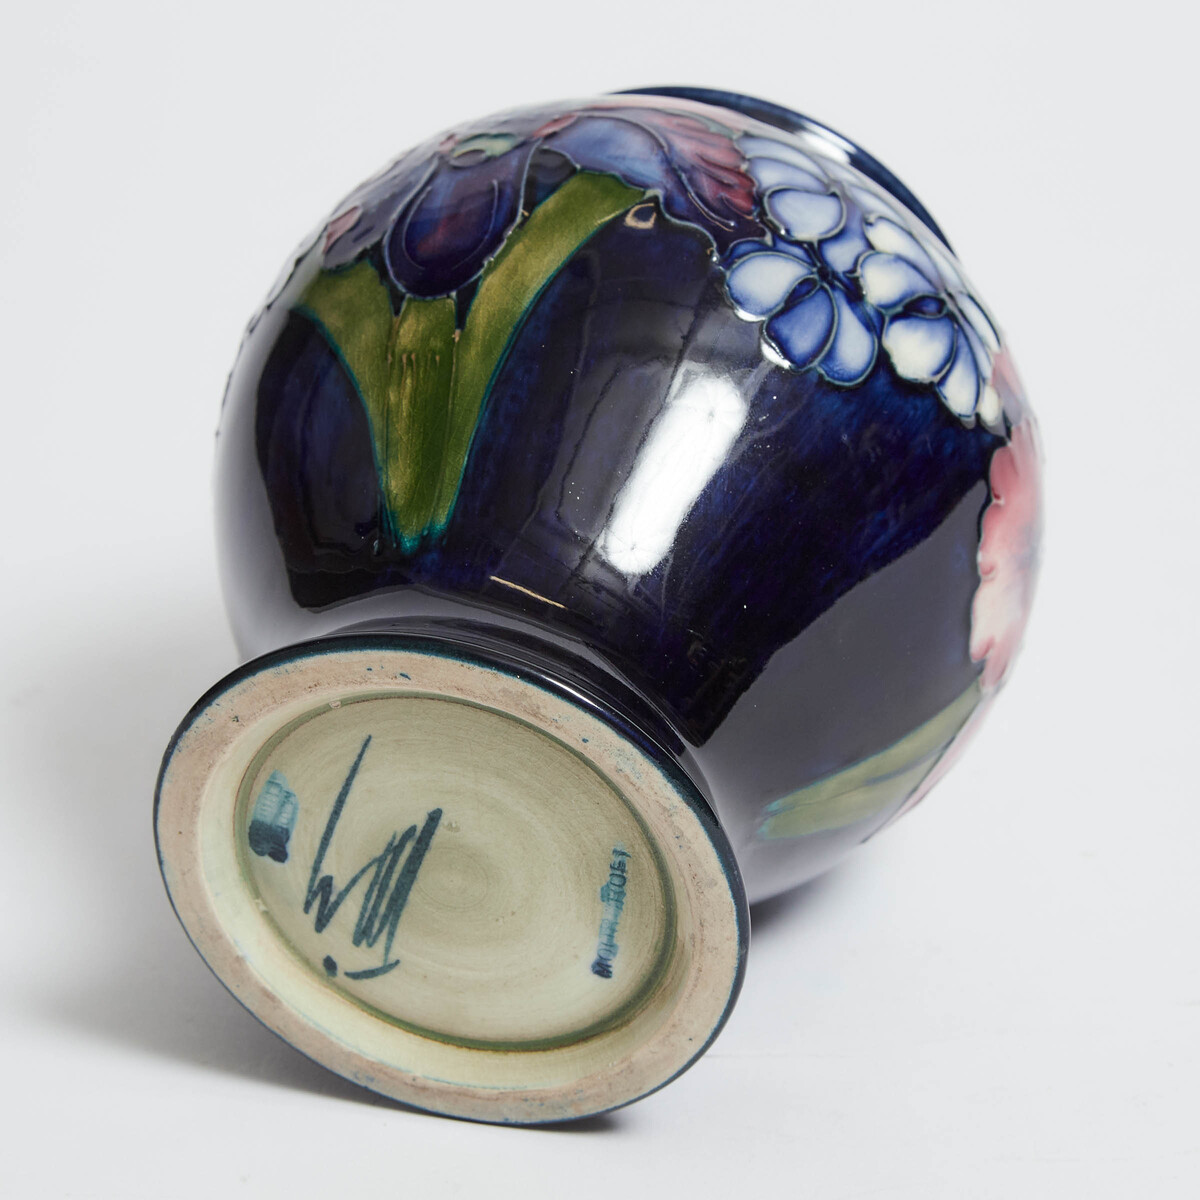 Moorcroft Orchids Vase, 1950s, height 5.6 in — 14.1 cm - Image 3 of 3